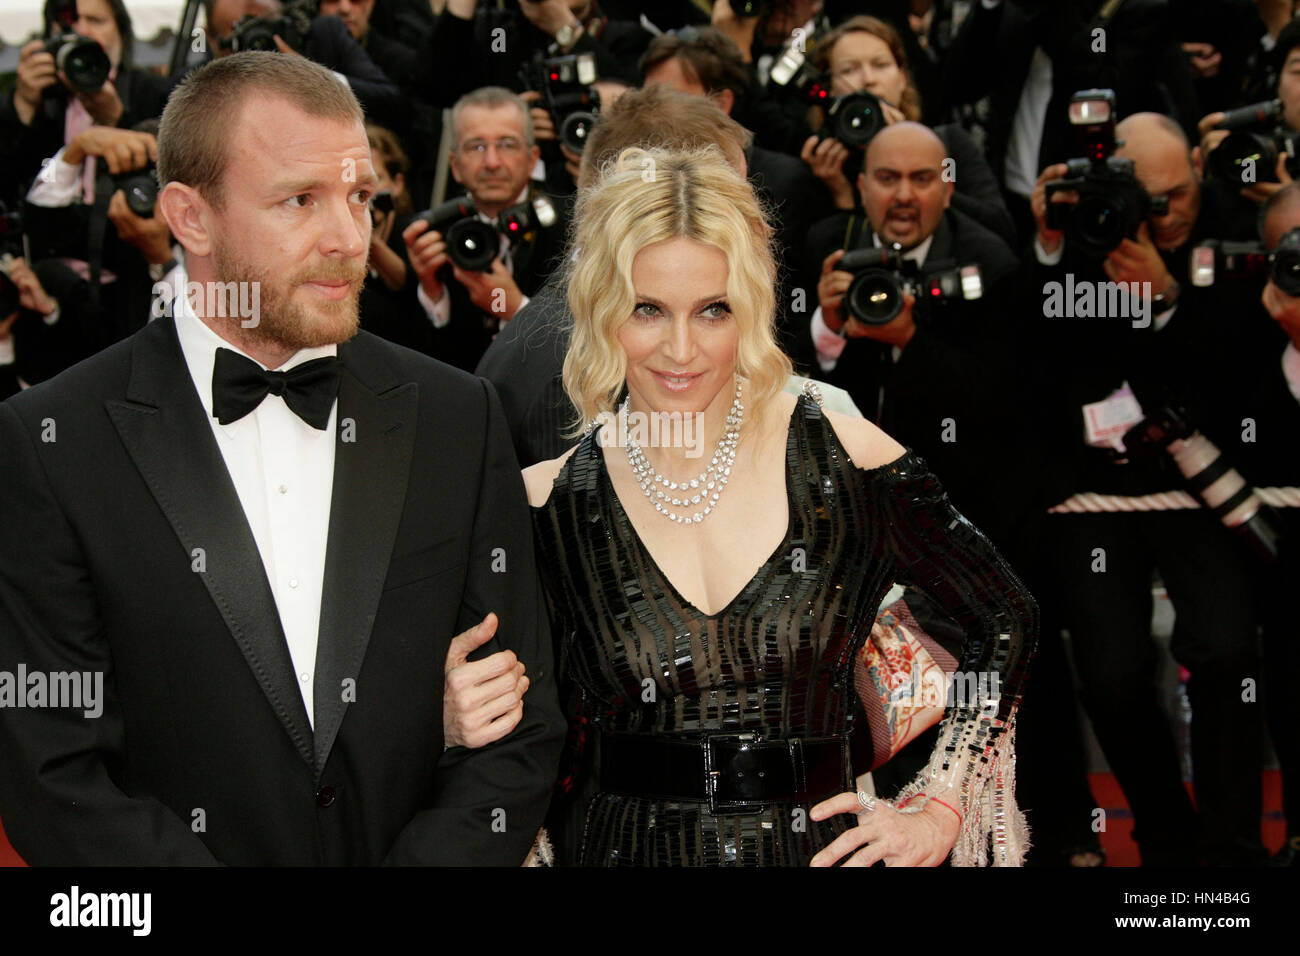 Madonna and Guy Ritchie arrives at Palais des Festivals during the 61st International Cannes Film Festival on May 21, 2008 in Cannes, France. Photo by Francis Specker Stock Photo